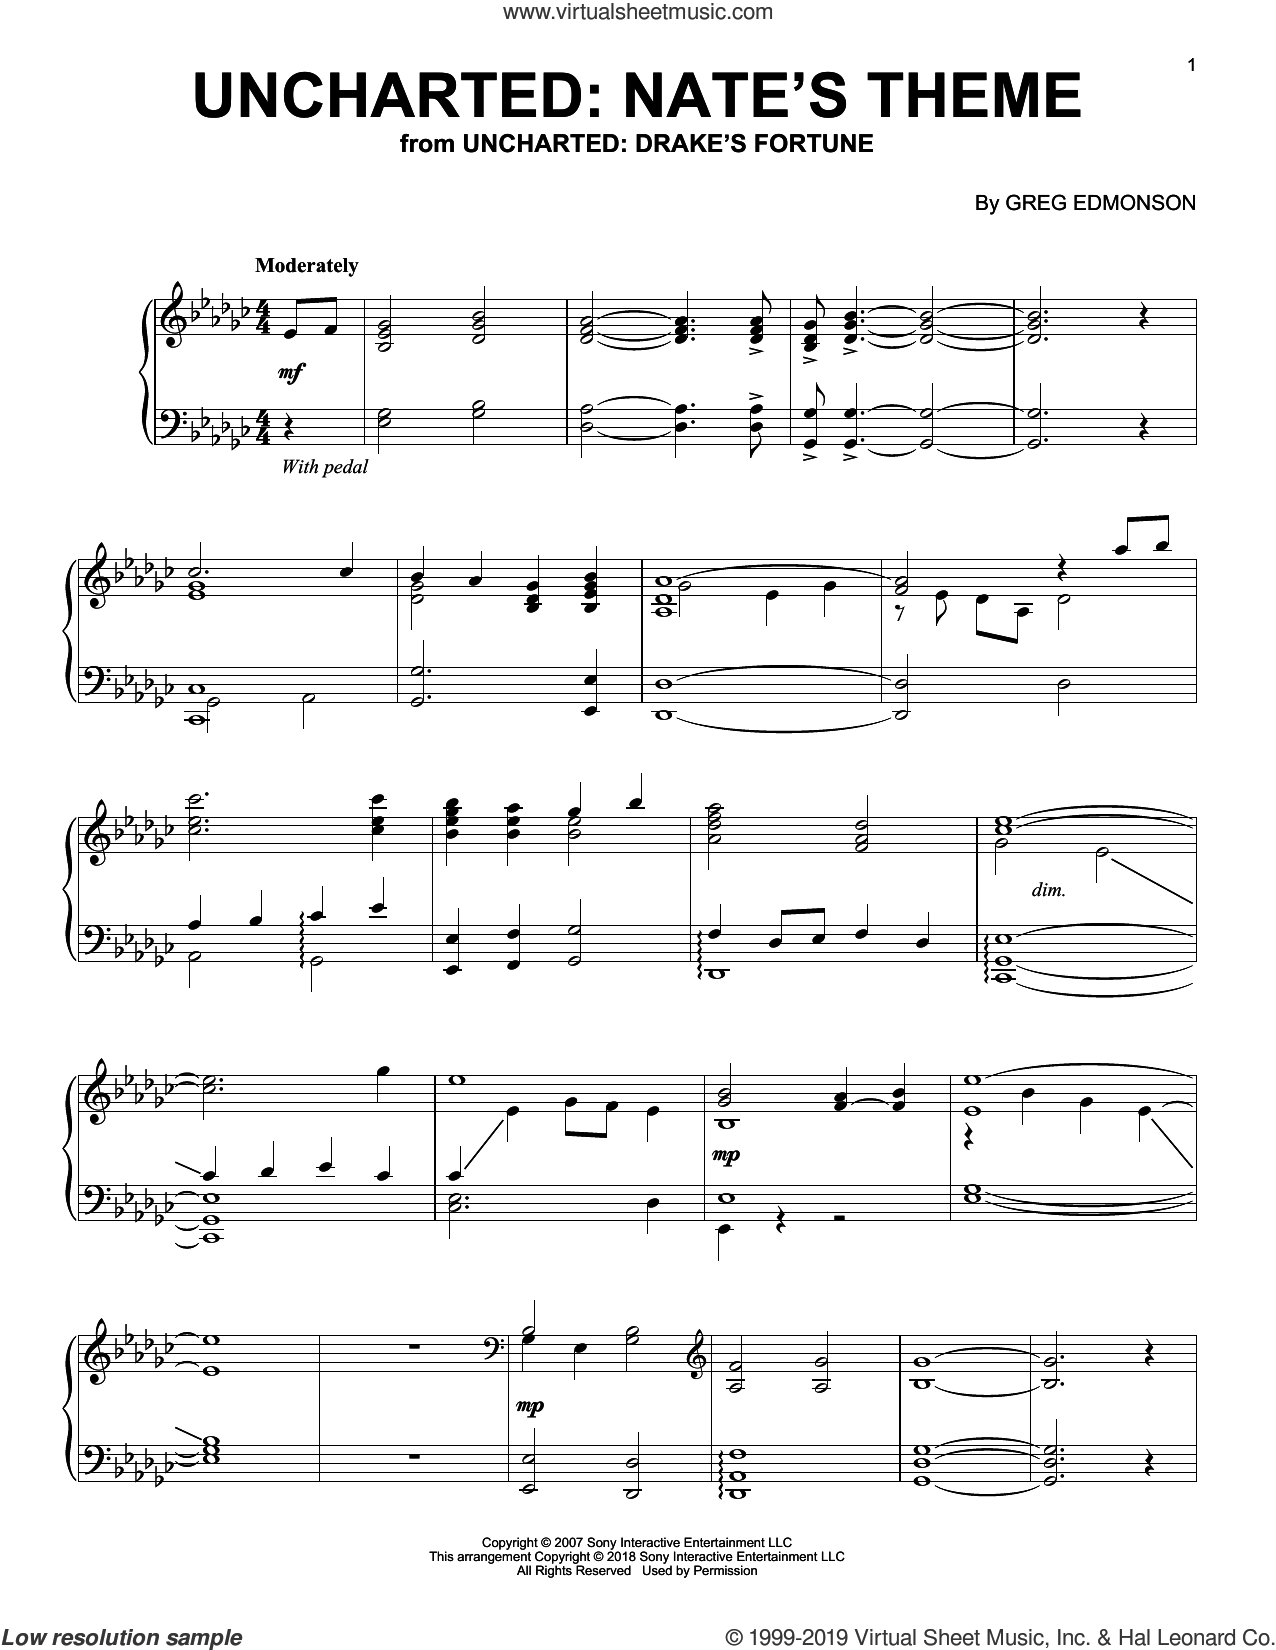 Rage Of Sparta (from God of War III) (Easy Piano) - Print Sheet Music